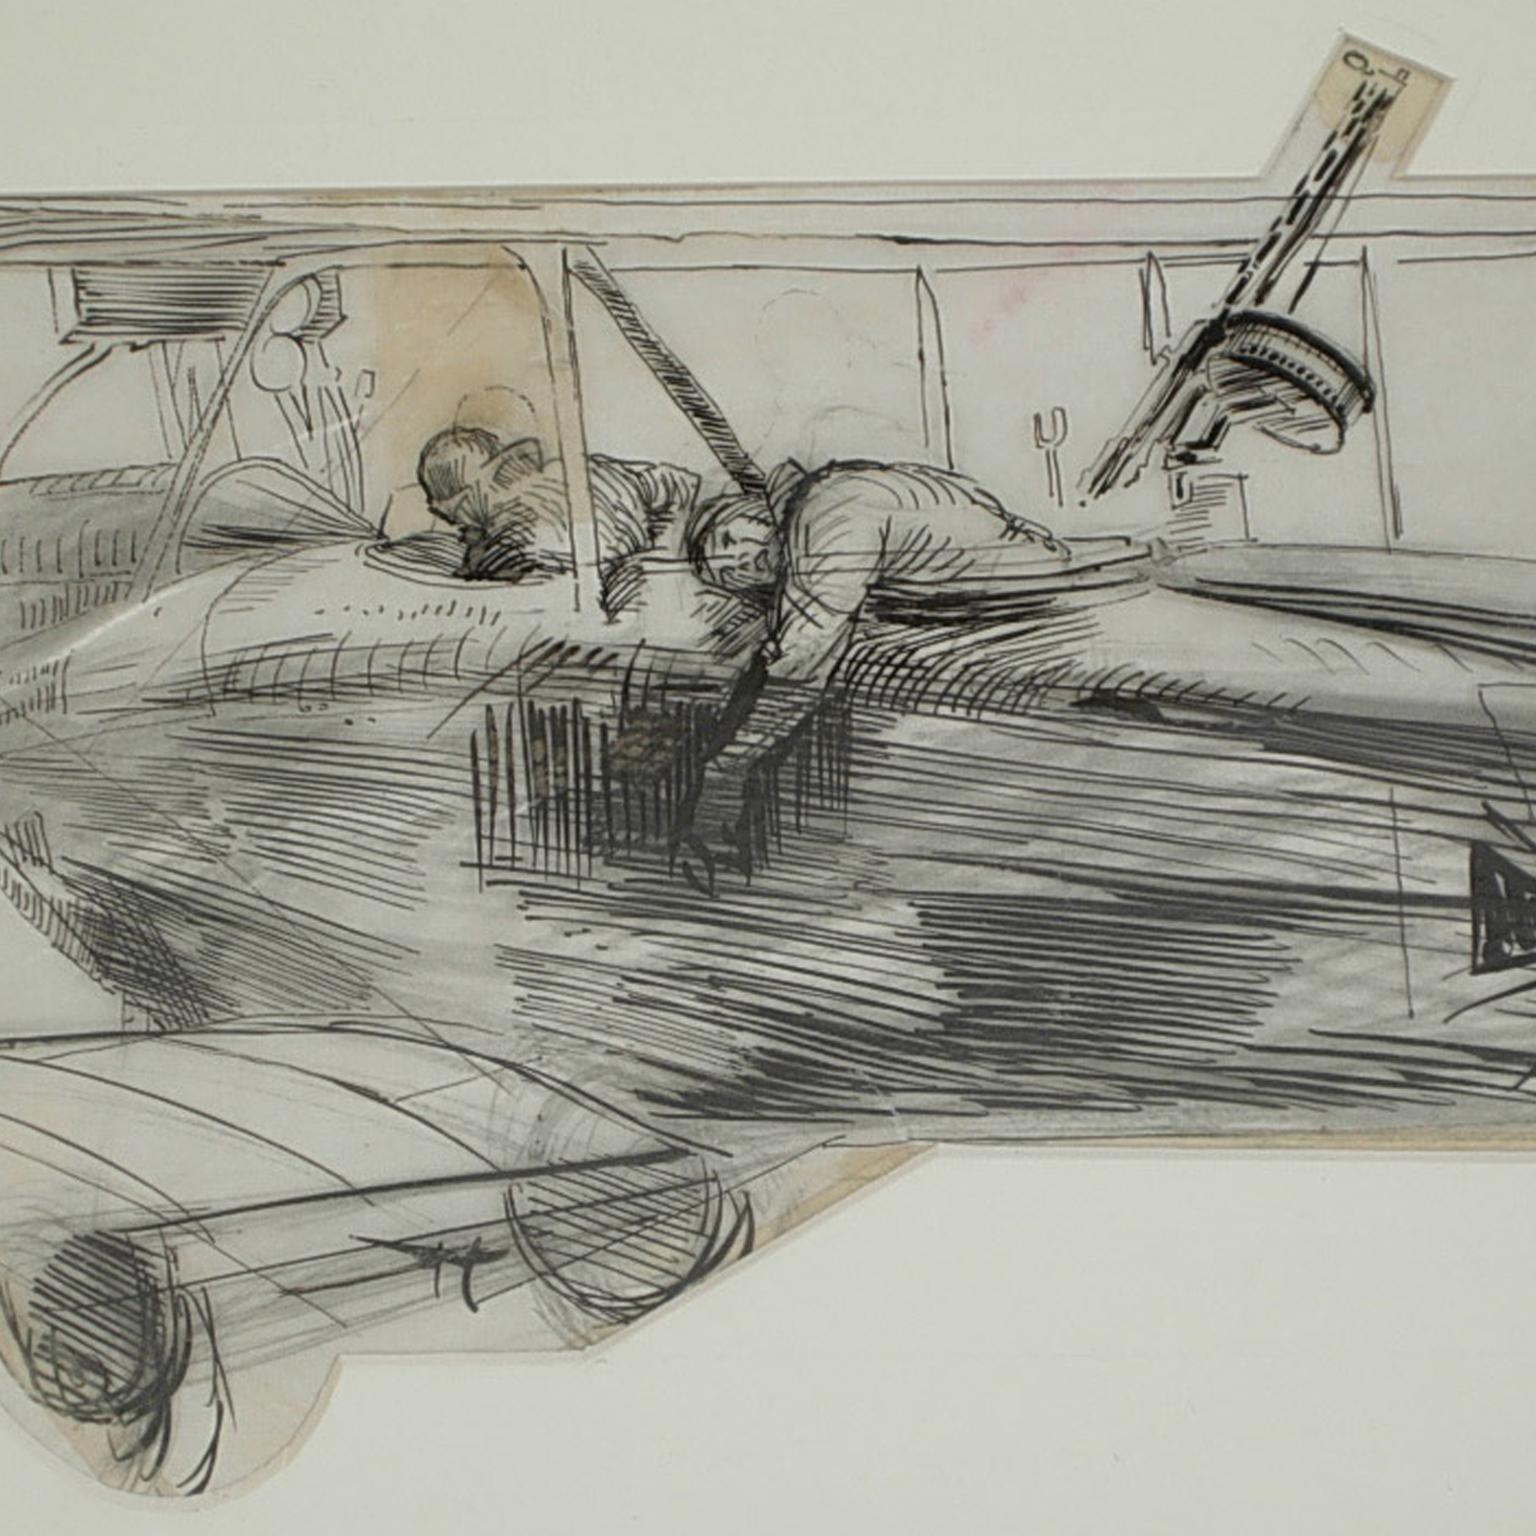 Indian ink drawing by Riccardo Cavigioli in the early 1920s depicting a two-seat biplane flying-boat for reconnaissance Berg Av C I, 37.55 series, furnished with an Austro Daimler 185 hp engine, produced in Austria by Aviatik in 1917. Measure with